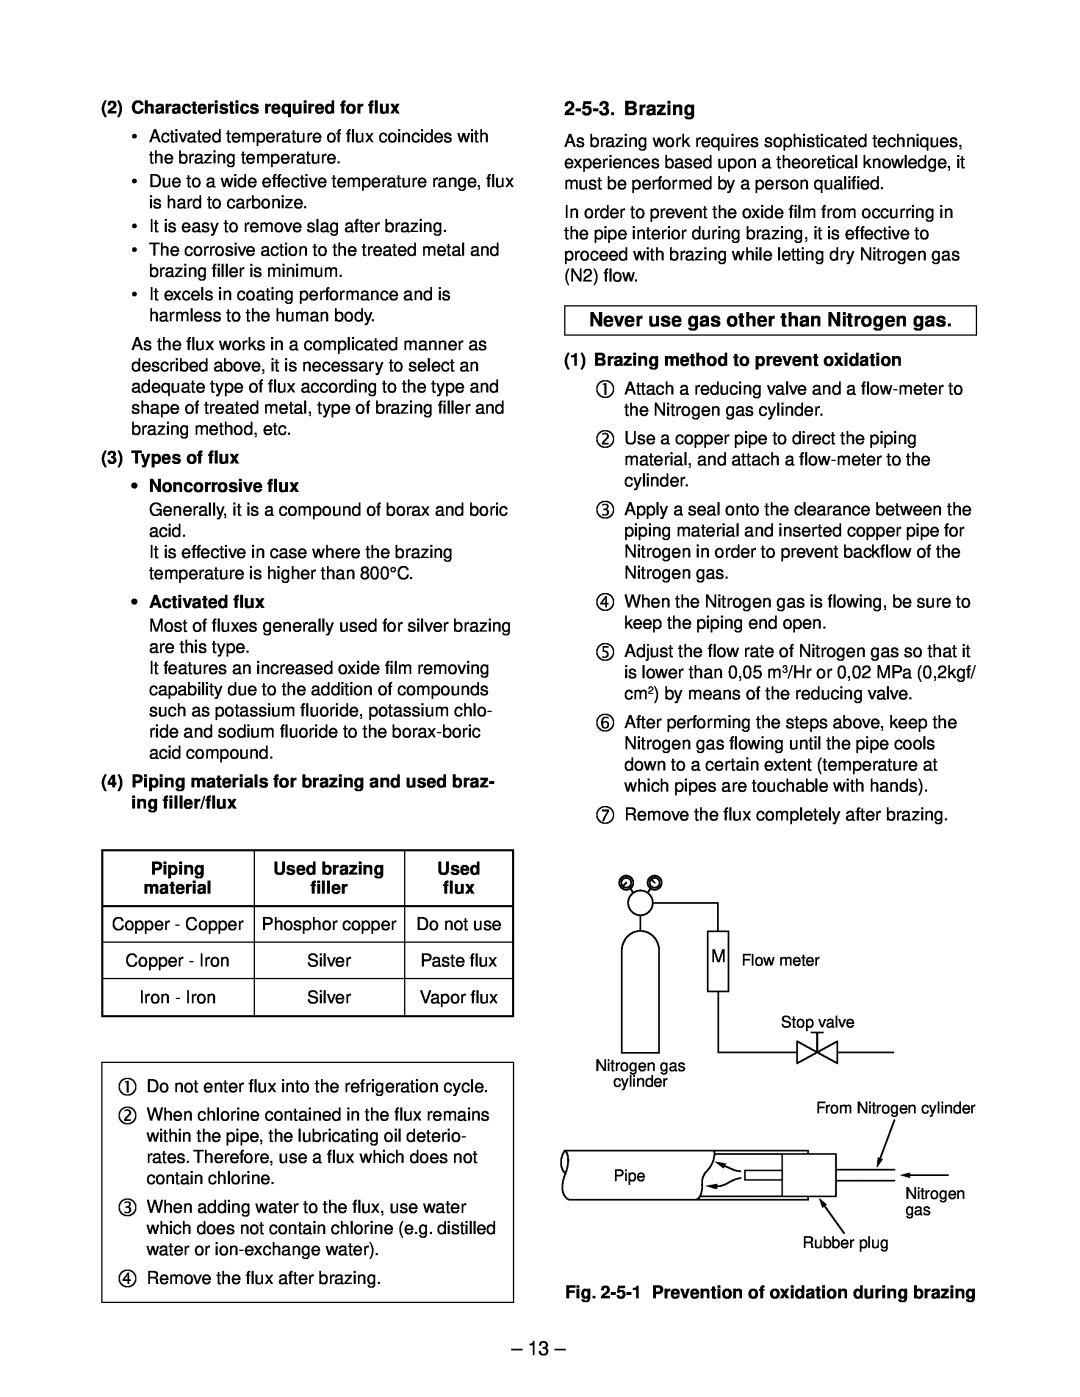 Toshiba RAS-10YKV-E, RAS-13YKV-E, RAS-10YAV-E, RAS-13YAV-E service manual Brazing, Never use gas other than Nitrogen gas 